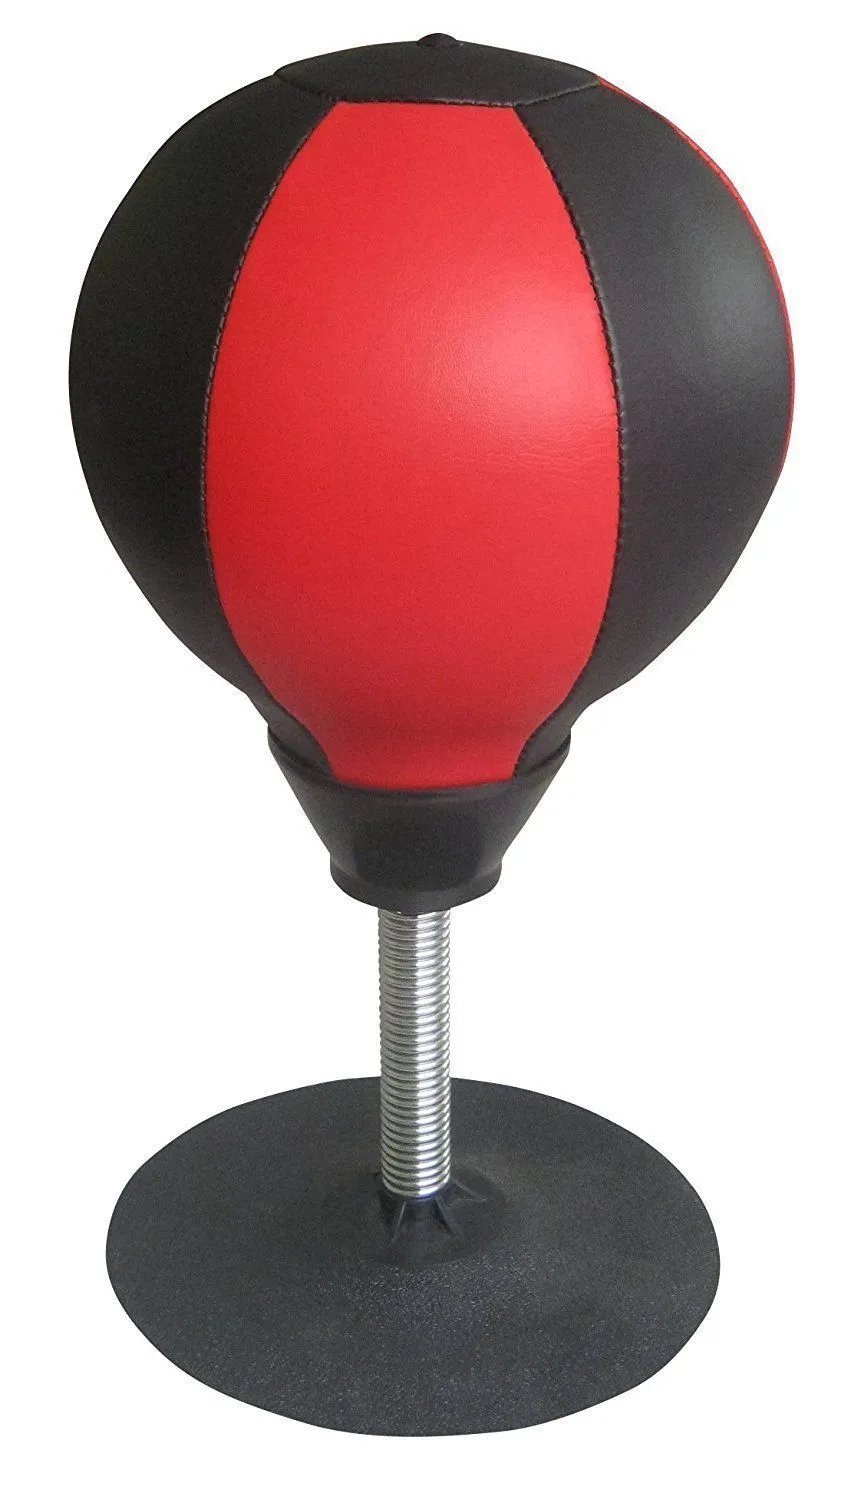 Dropshipping-New-Desktop-Punching-Speed-Ball-Heavy-Duty-Suction-Pressure-Relieve-Stress-Boxing-B